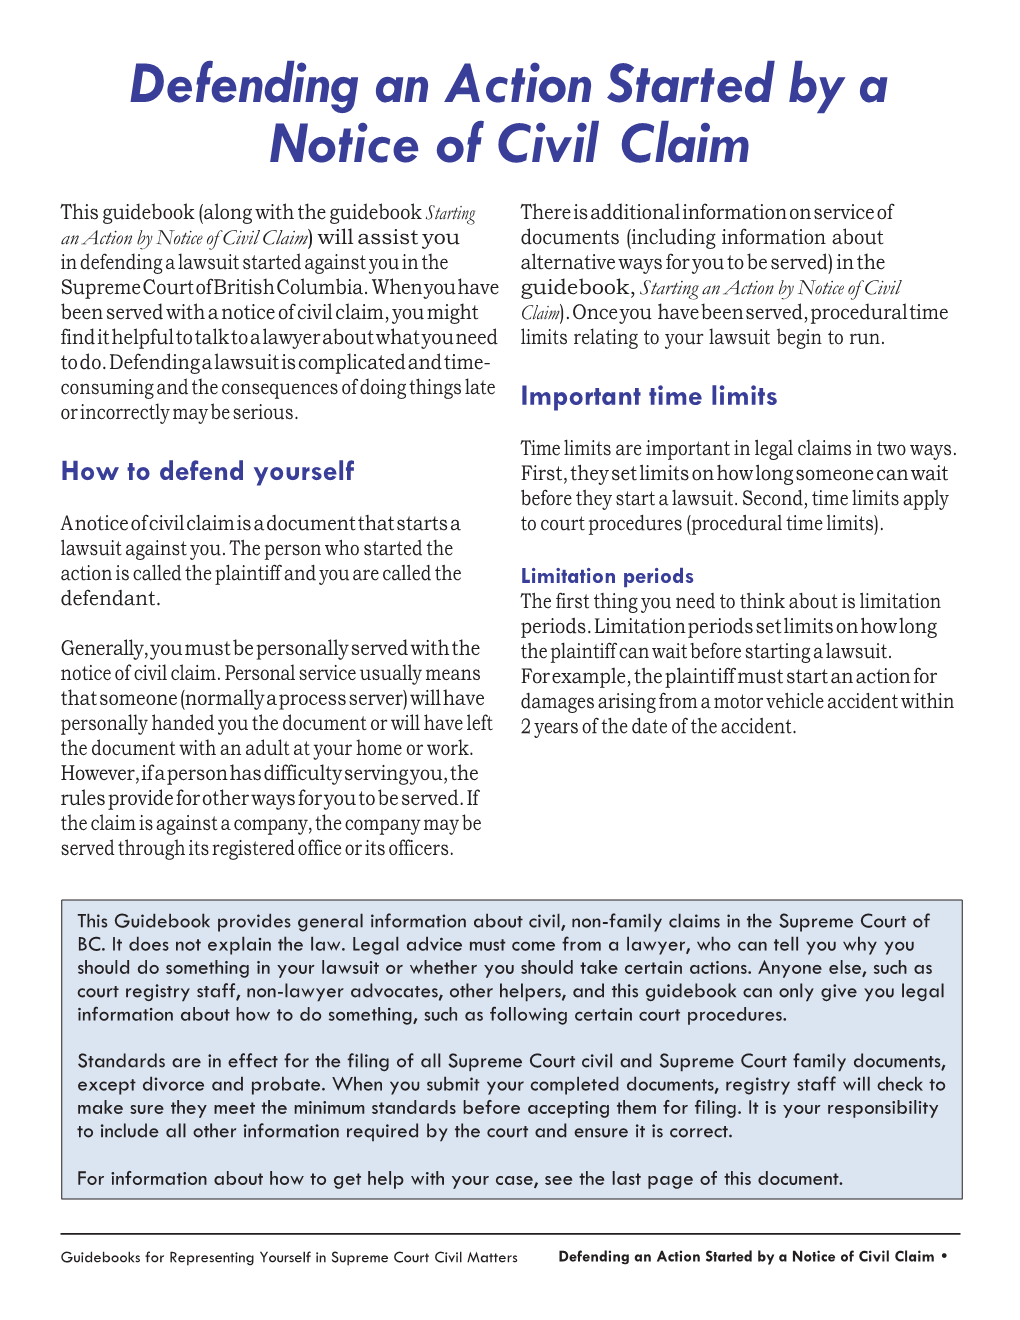 Defending an Action Started by a Notice of Civil Claim